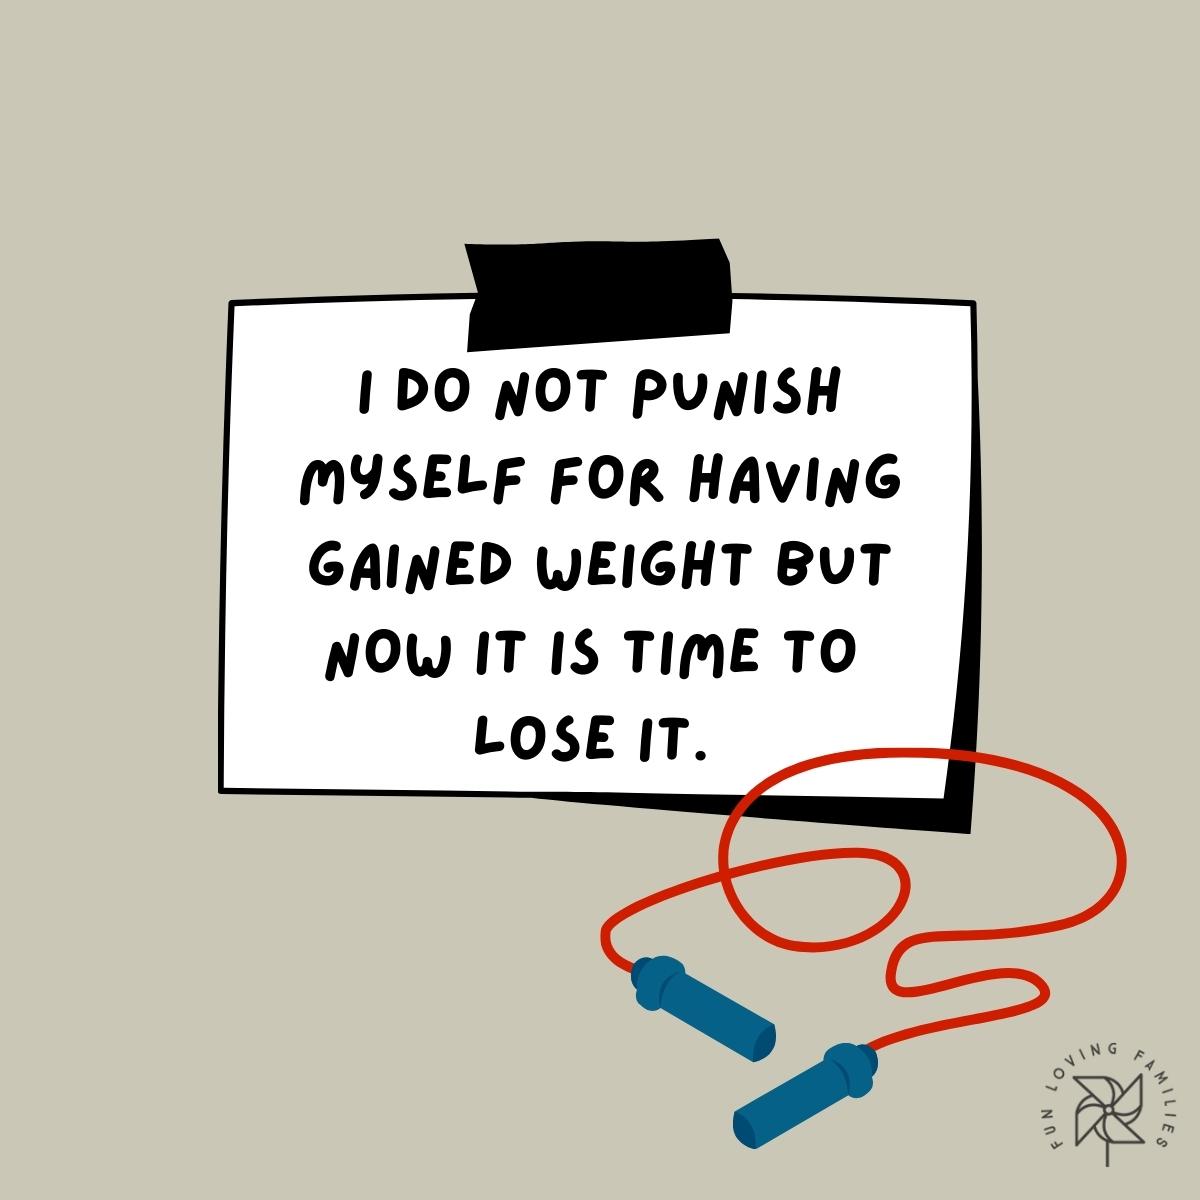 I do not punish myself for having gained weight but now it is time to lose it affirmation